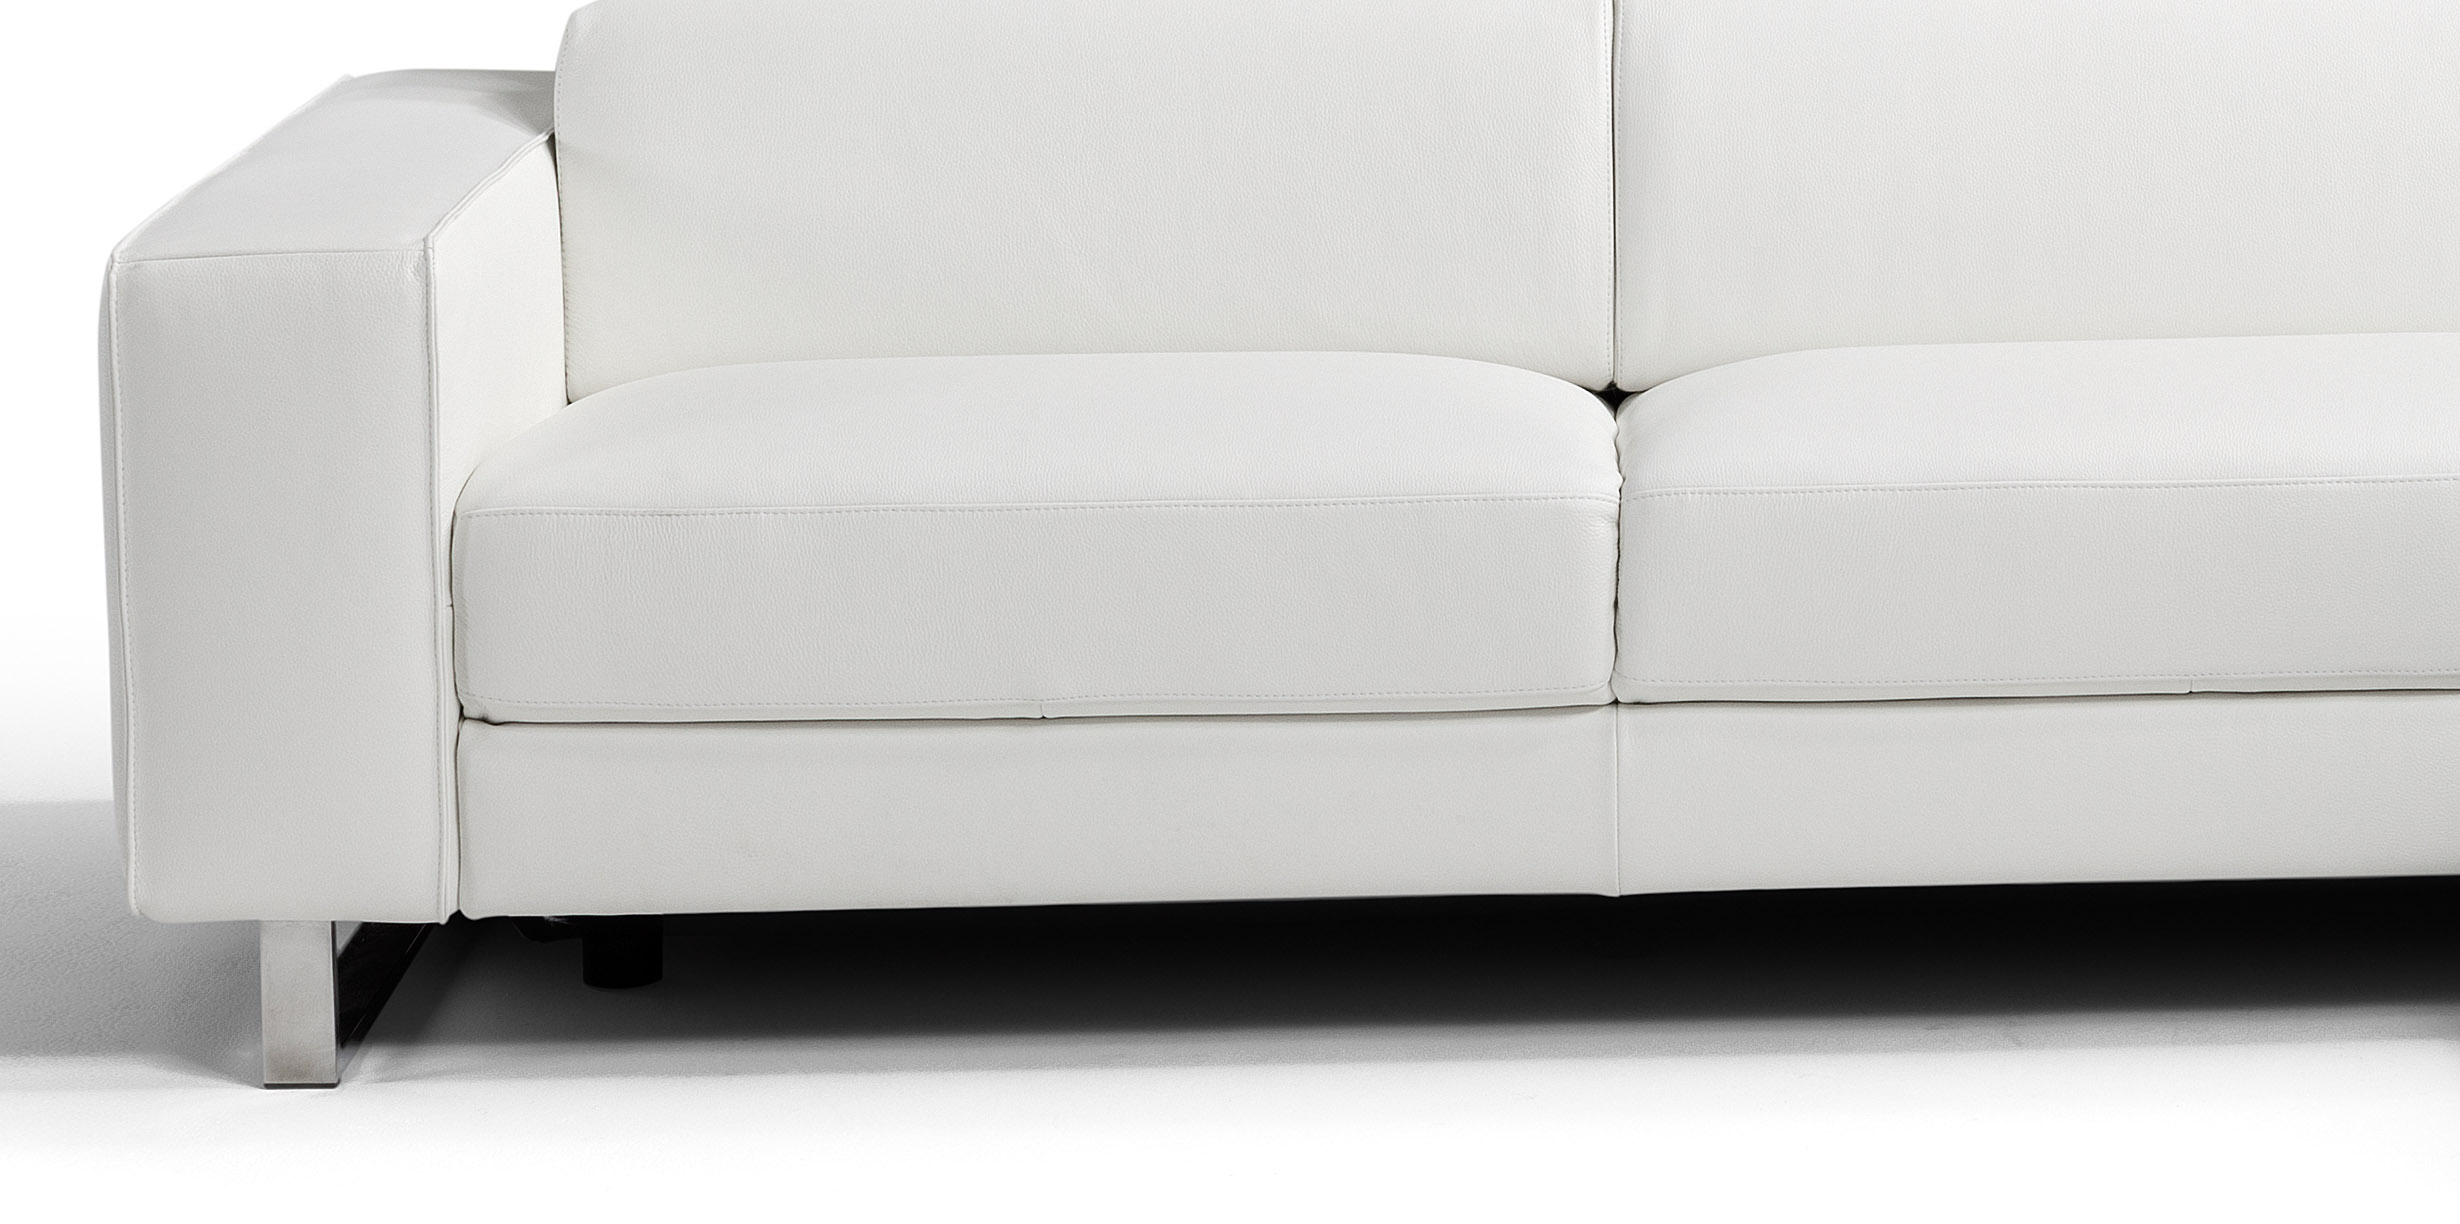 Italian Top Grain Leather Sectional with Adjustable Headrests - Click Image to Close